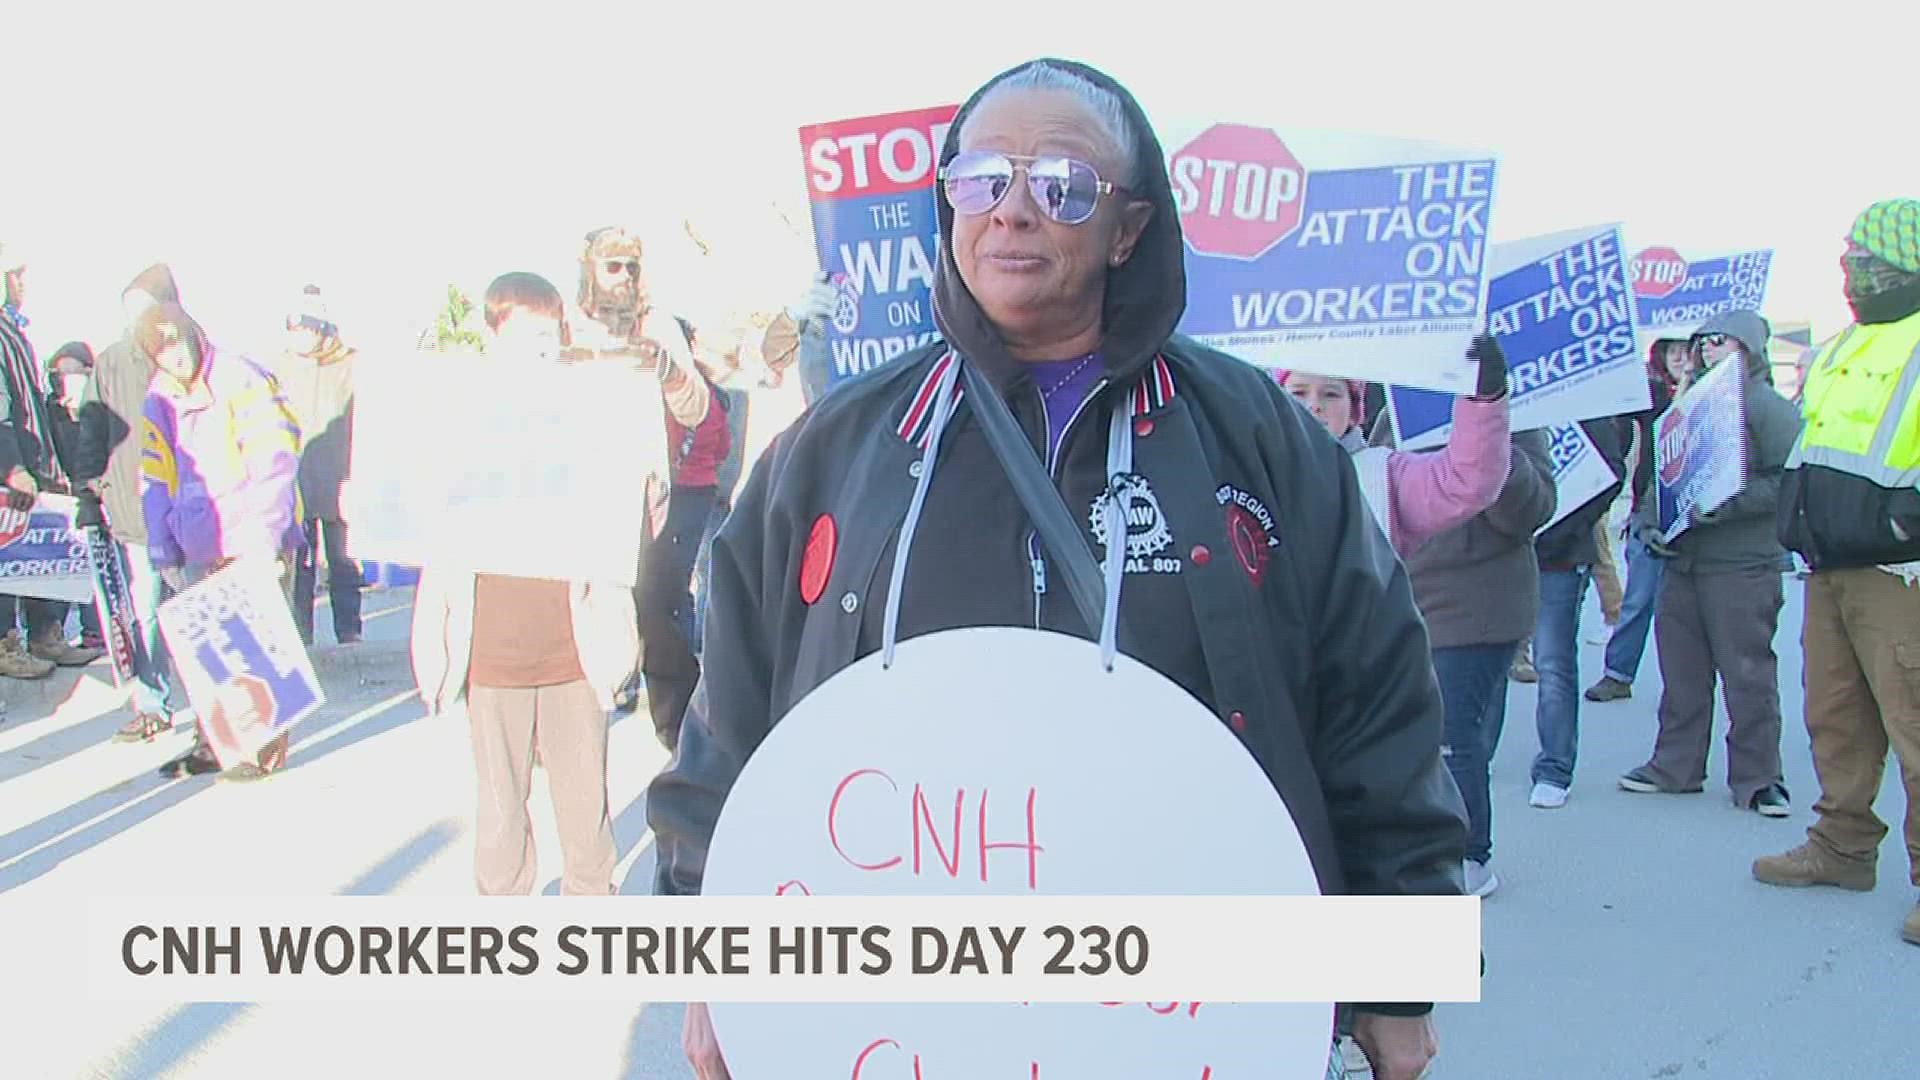 The workers went on strike in May, demanding better wages, cheaper healthcare and more flexible time off scheduling.